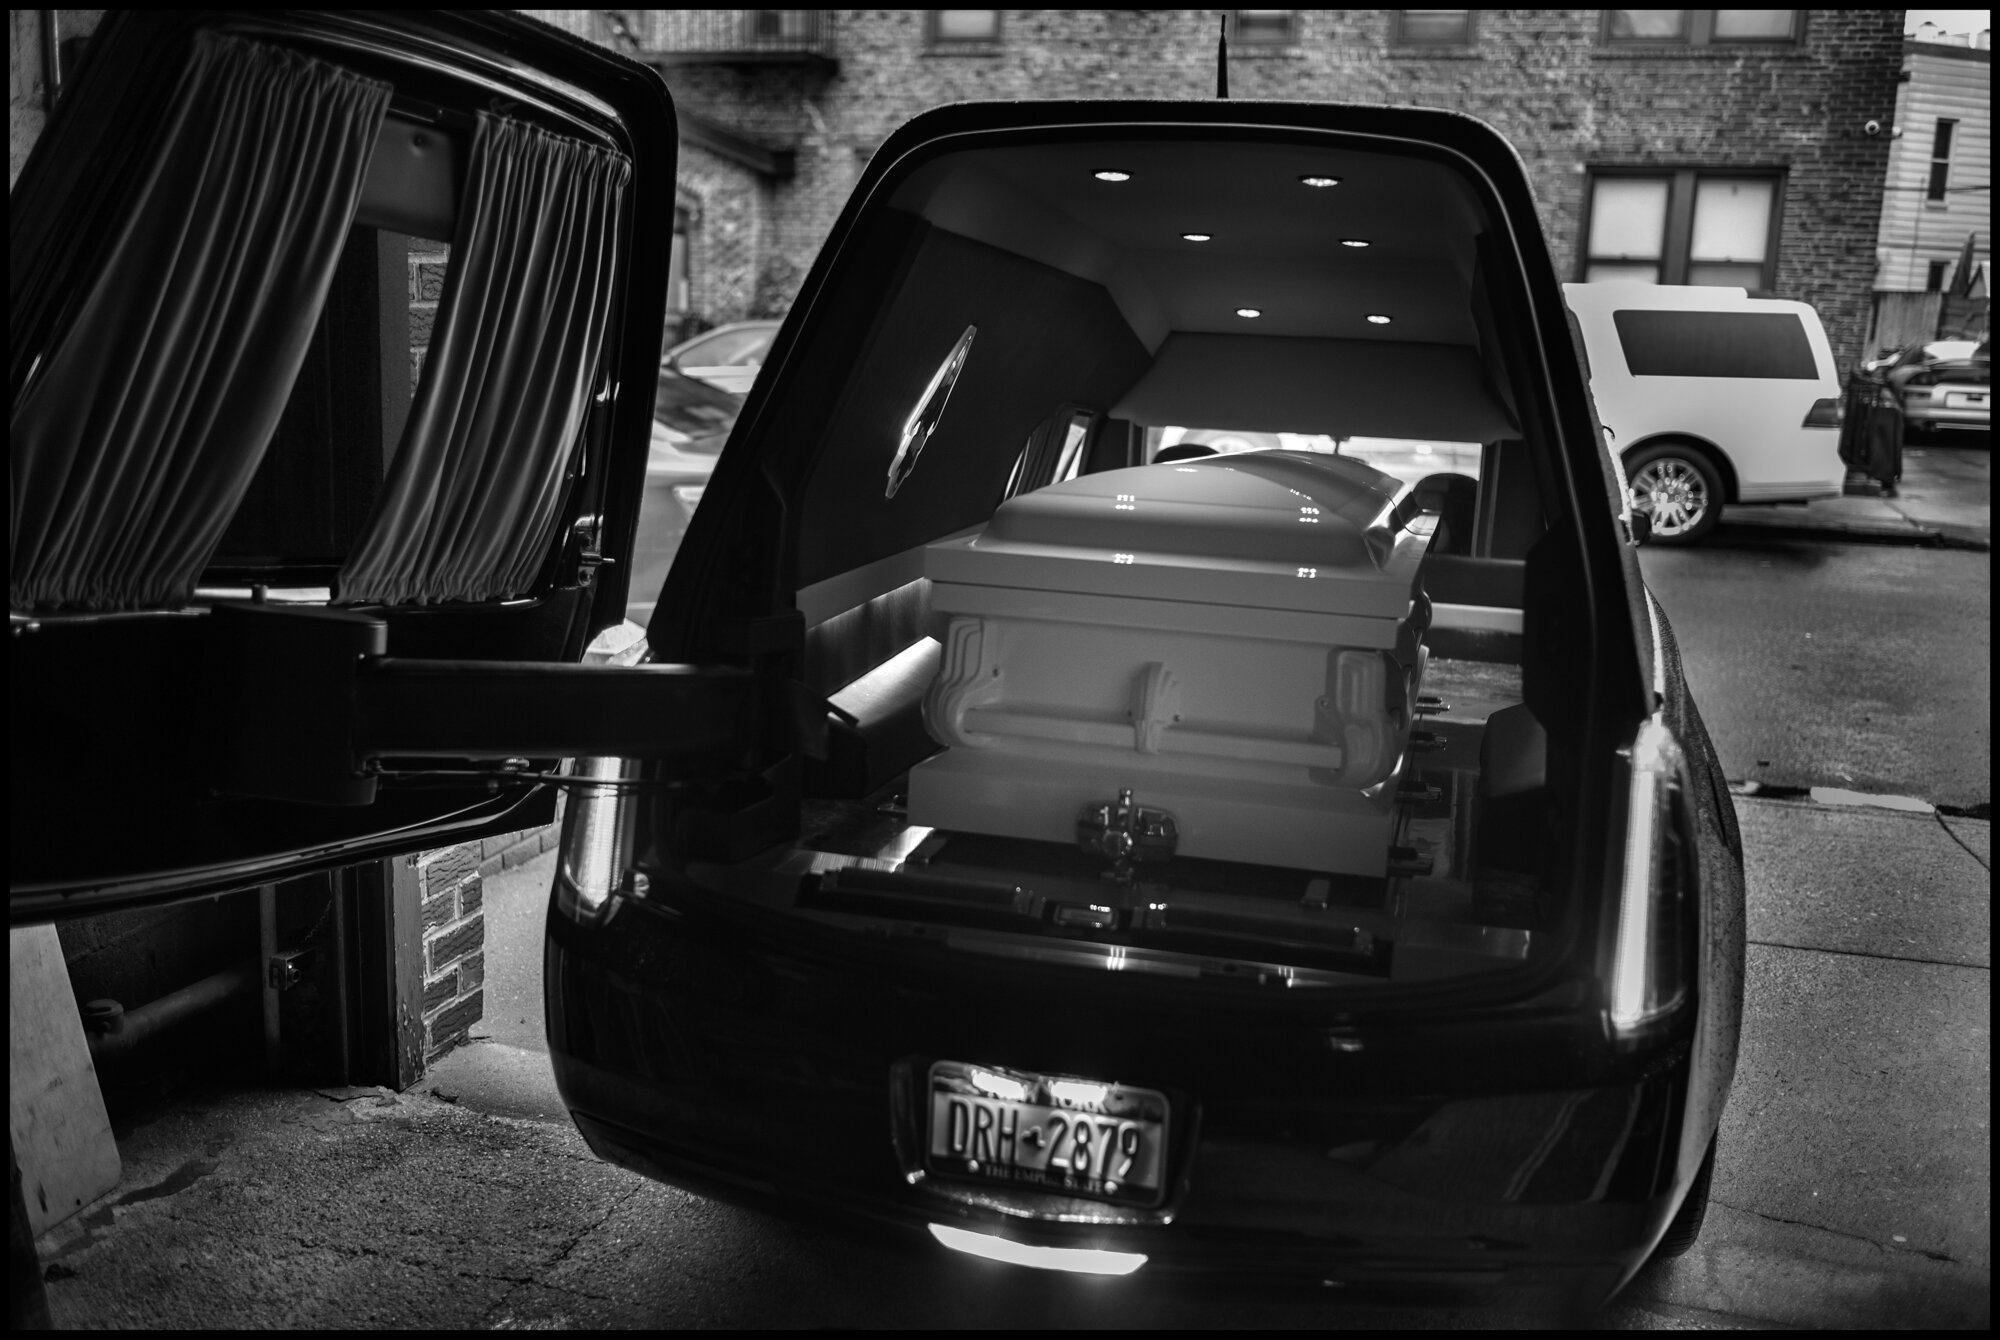  The casket of a victim of coronavirus-19 waits to go to burial.  April, 2020. © Peter Turnley.  ID# 51-001 